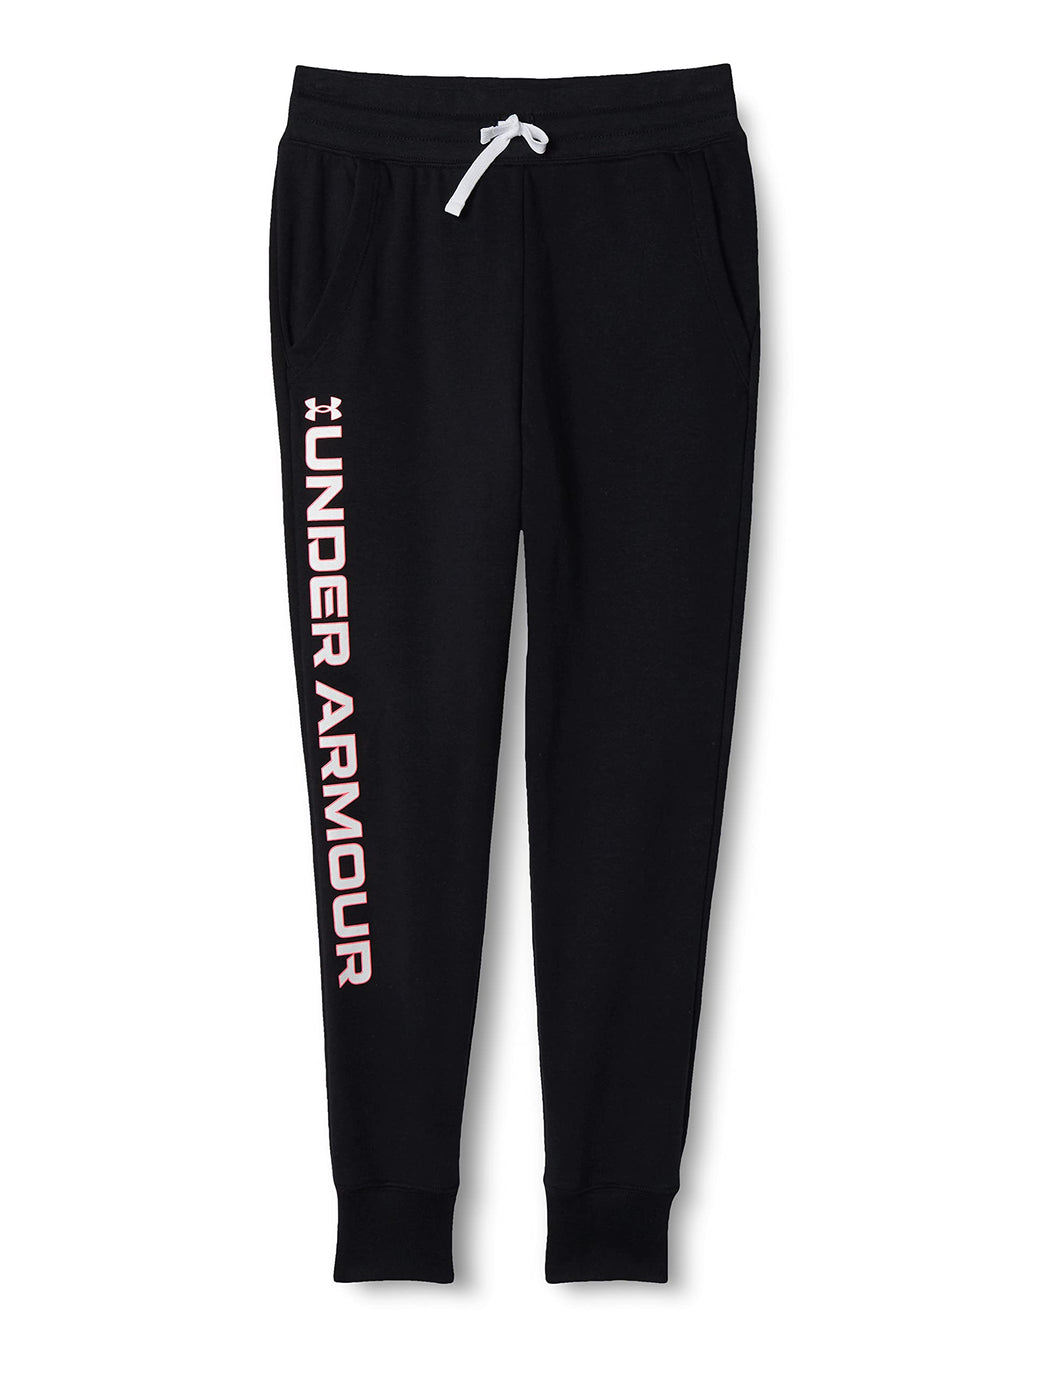 Under Armour girls Rival Fleece Joggers , Black (002)/Cerise , Youth X-Small